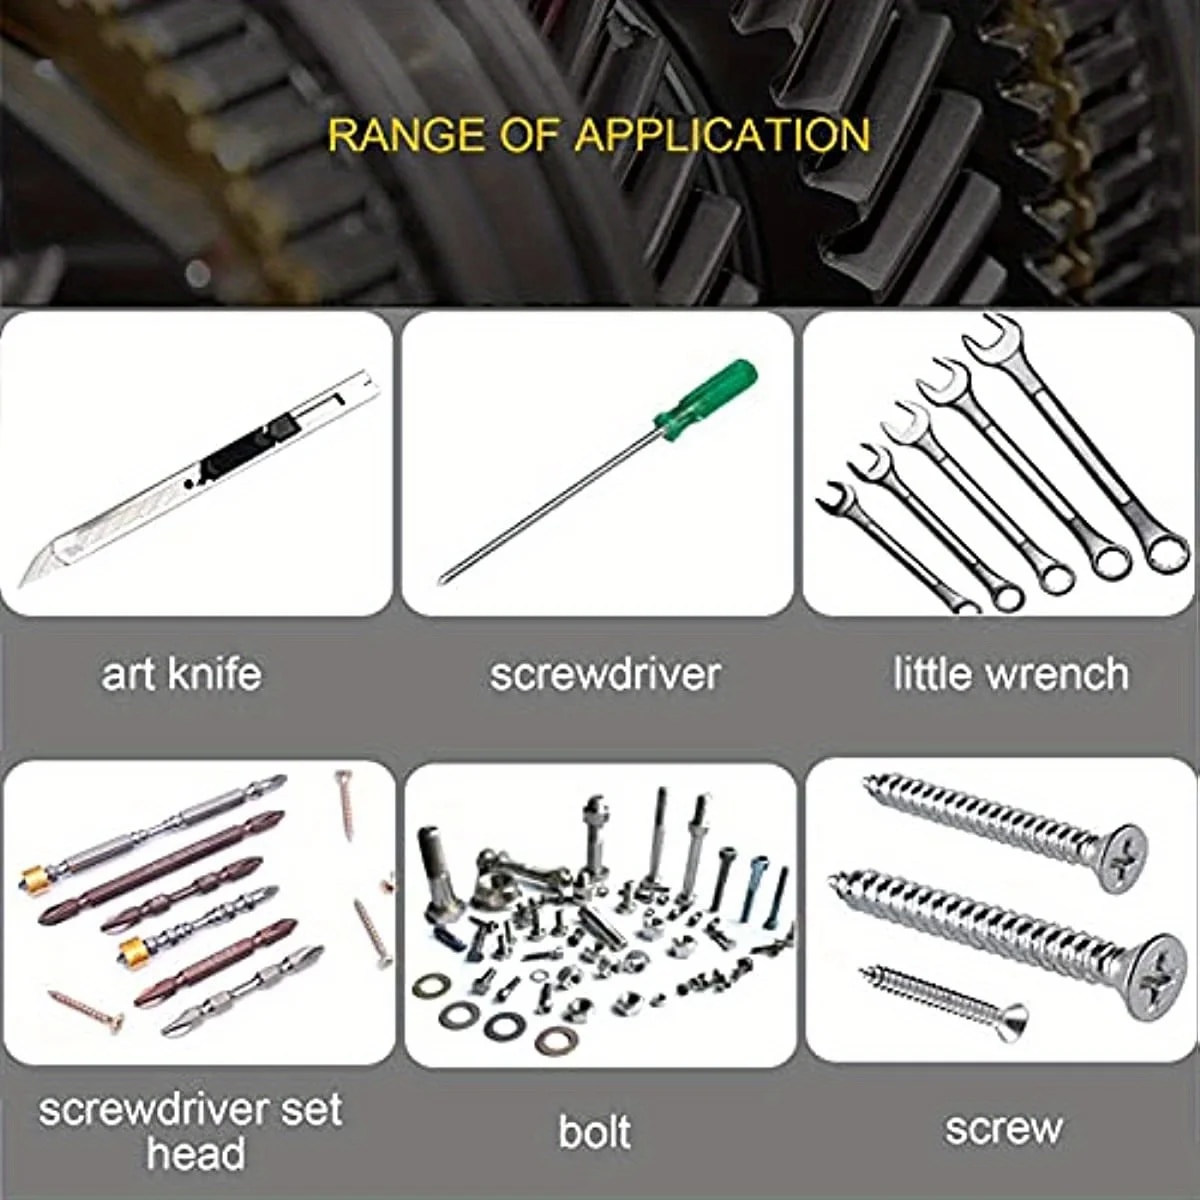 Household-Kingdom hk123mart.com-Wrist Tool Holder With Fixing Screws And Nails